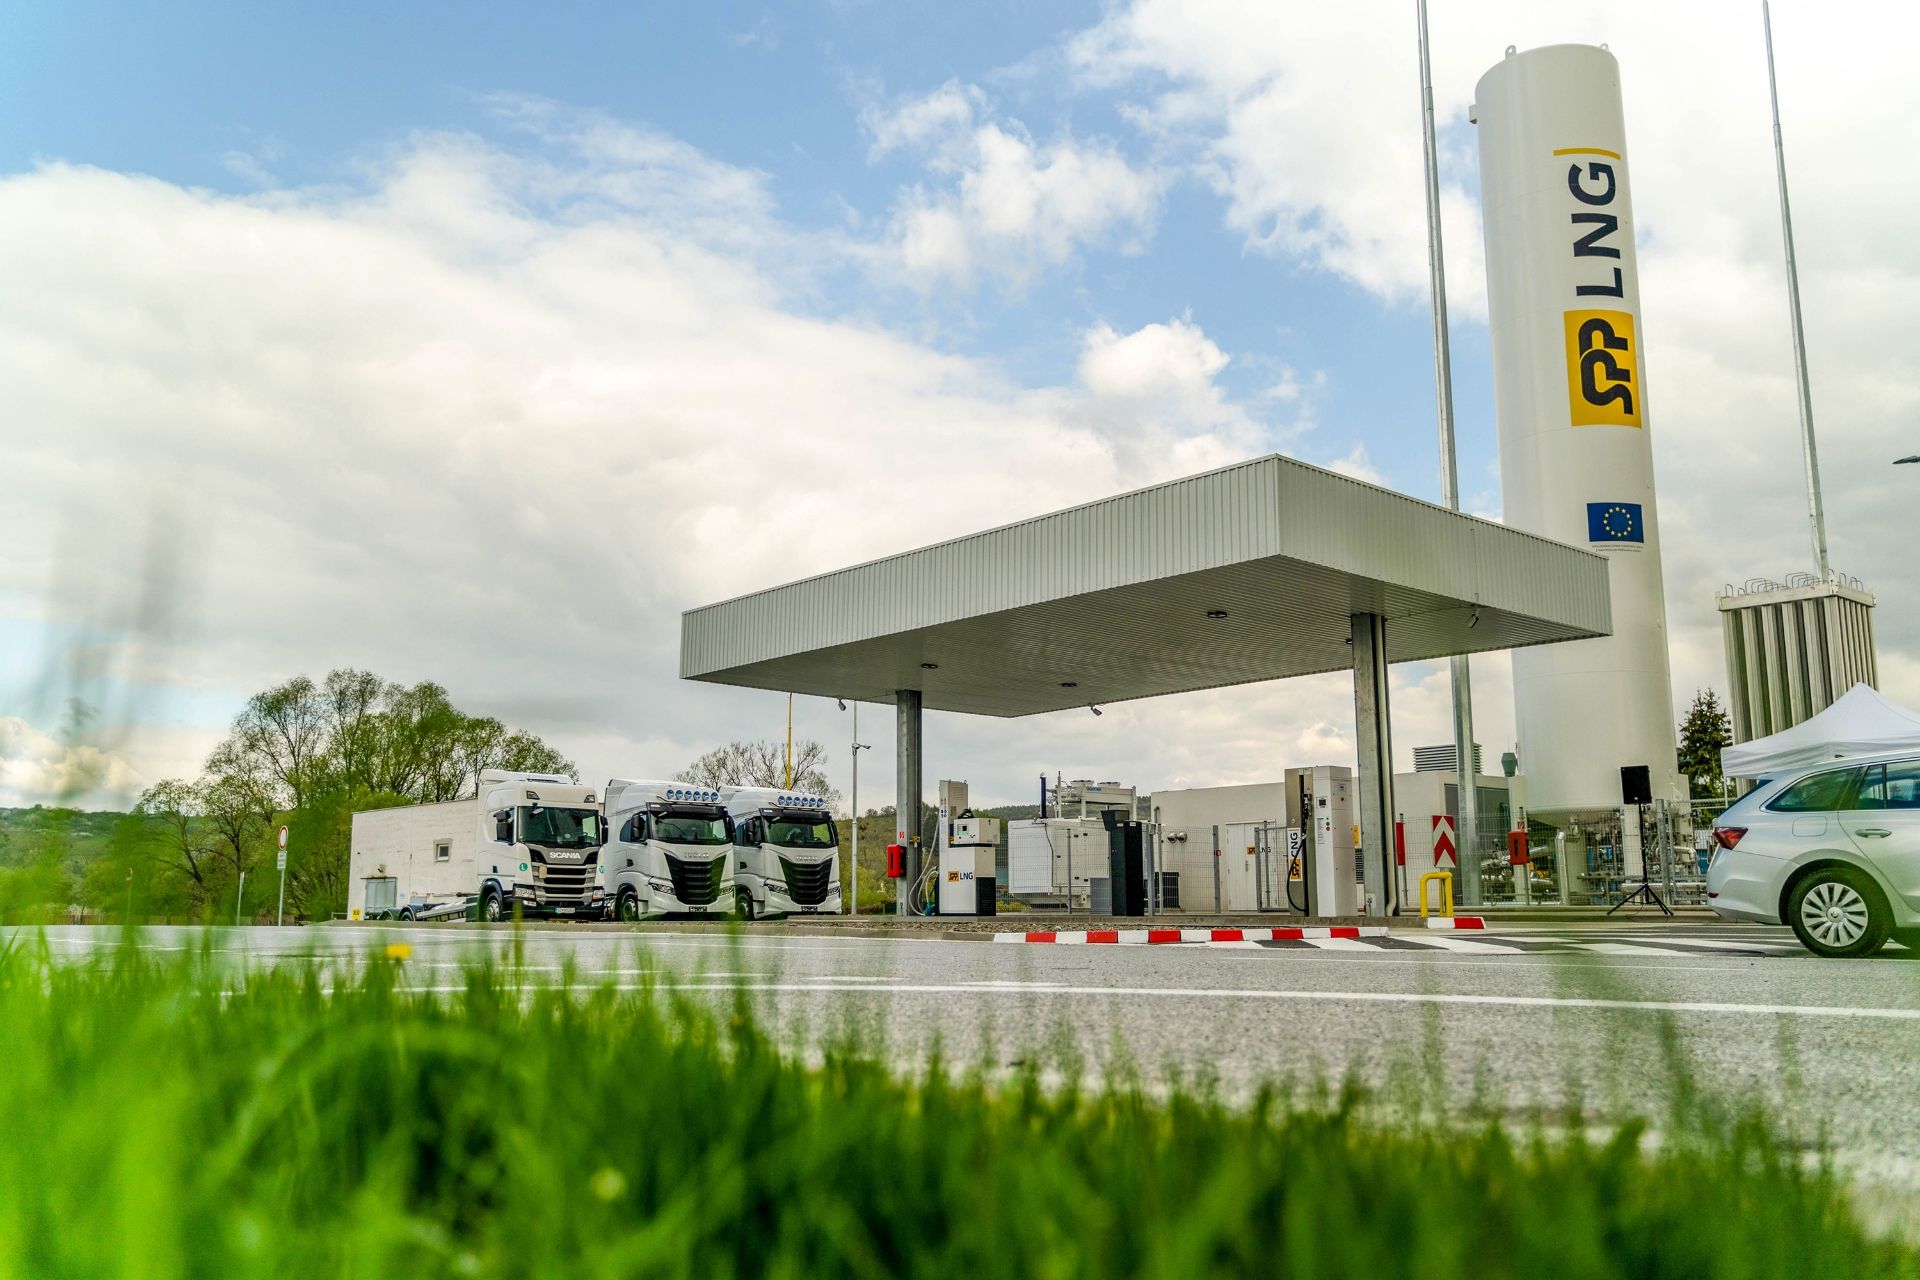 Slovakia’s SPP opens new LNG fueling station